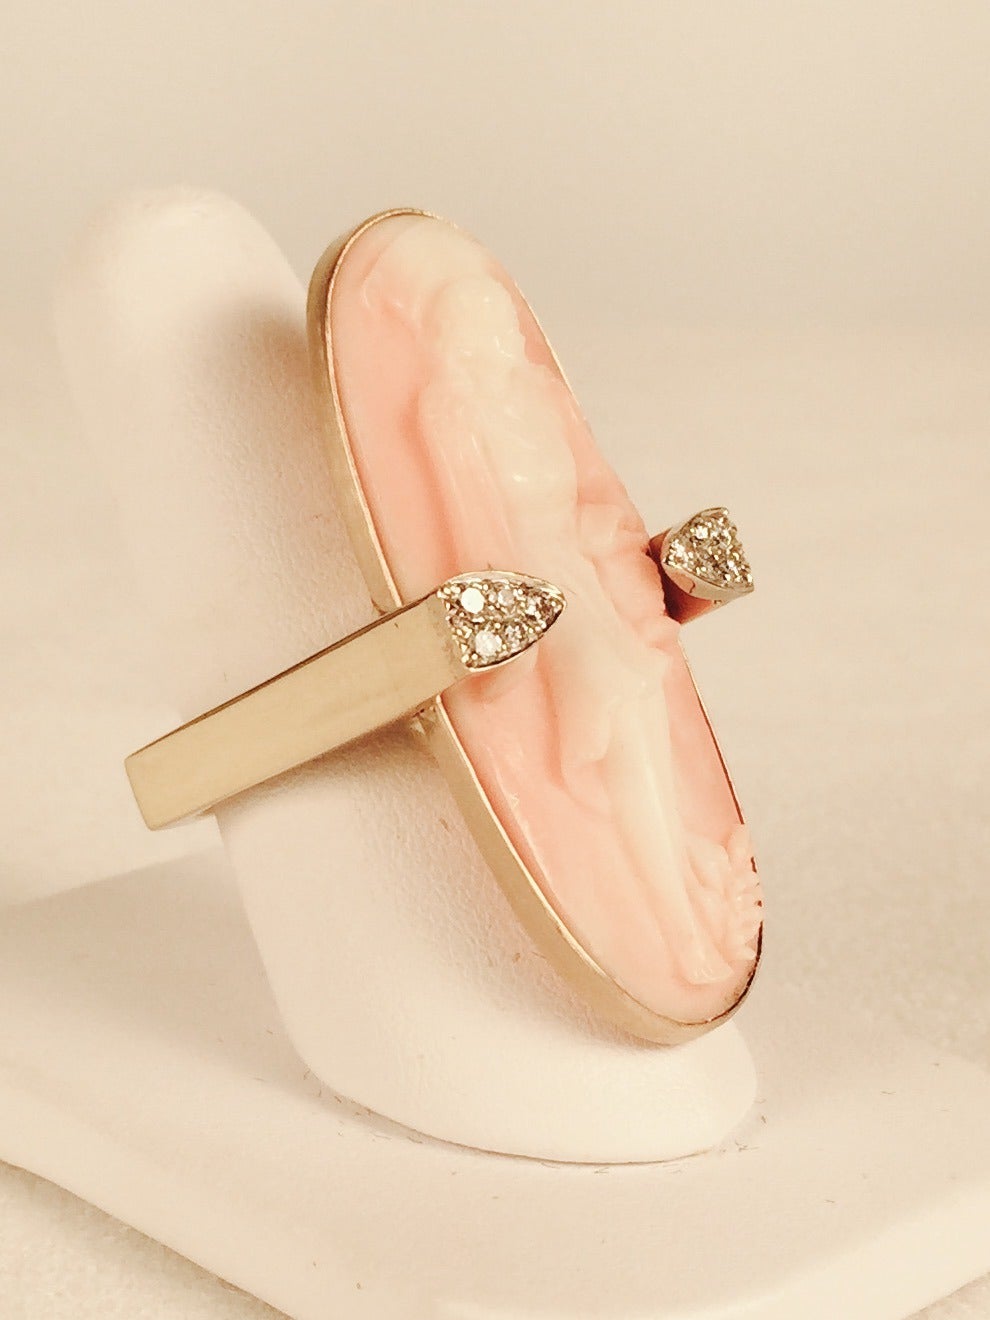 Delicately carved lady in bezel set Pink Coral distinguishes this ring from the rest!  Two prong-like enhancements contain 10 brilliant cut diamonds approximately .50ct total weight.  Size 7 with soldered sizing spring.  Squared-off shank prevents